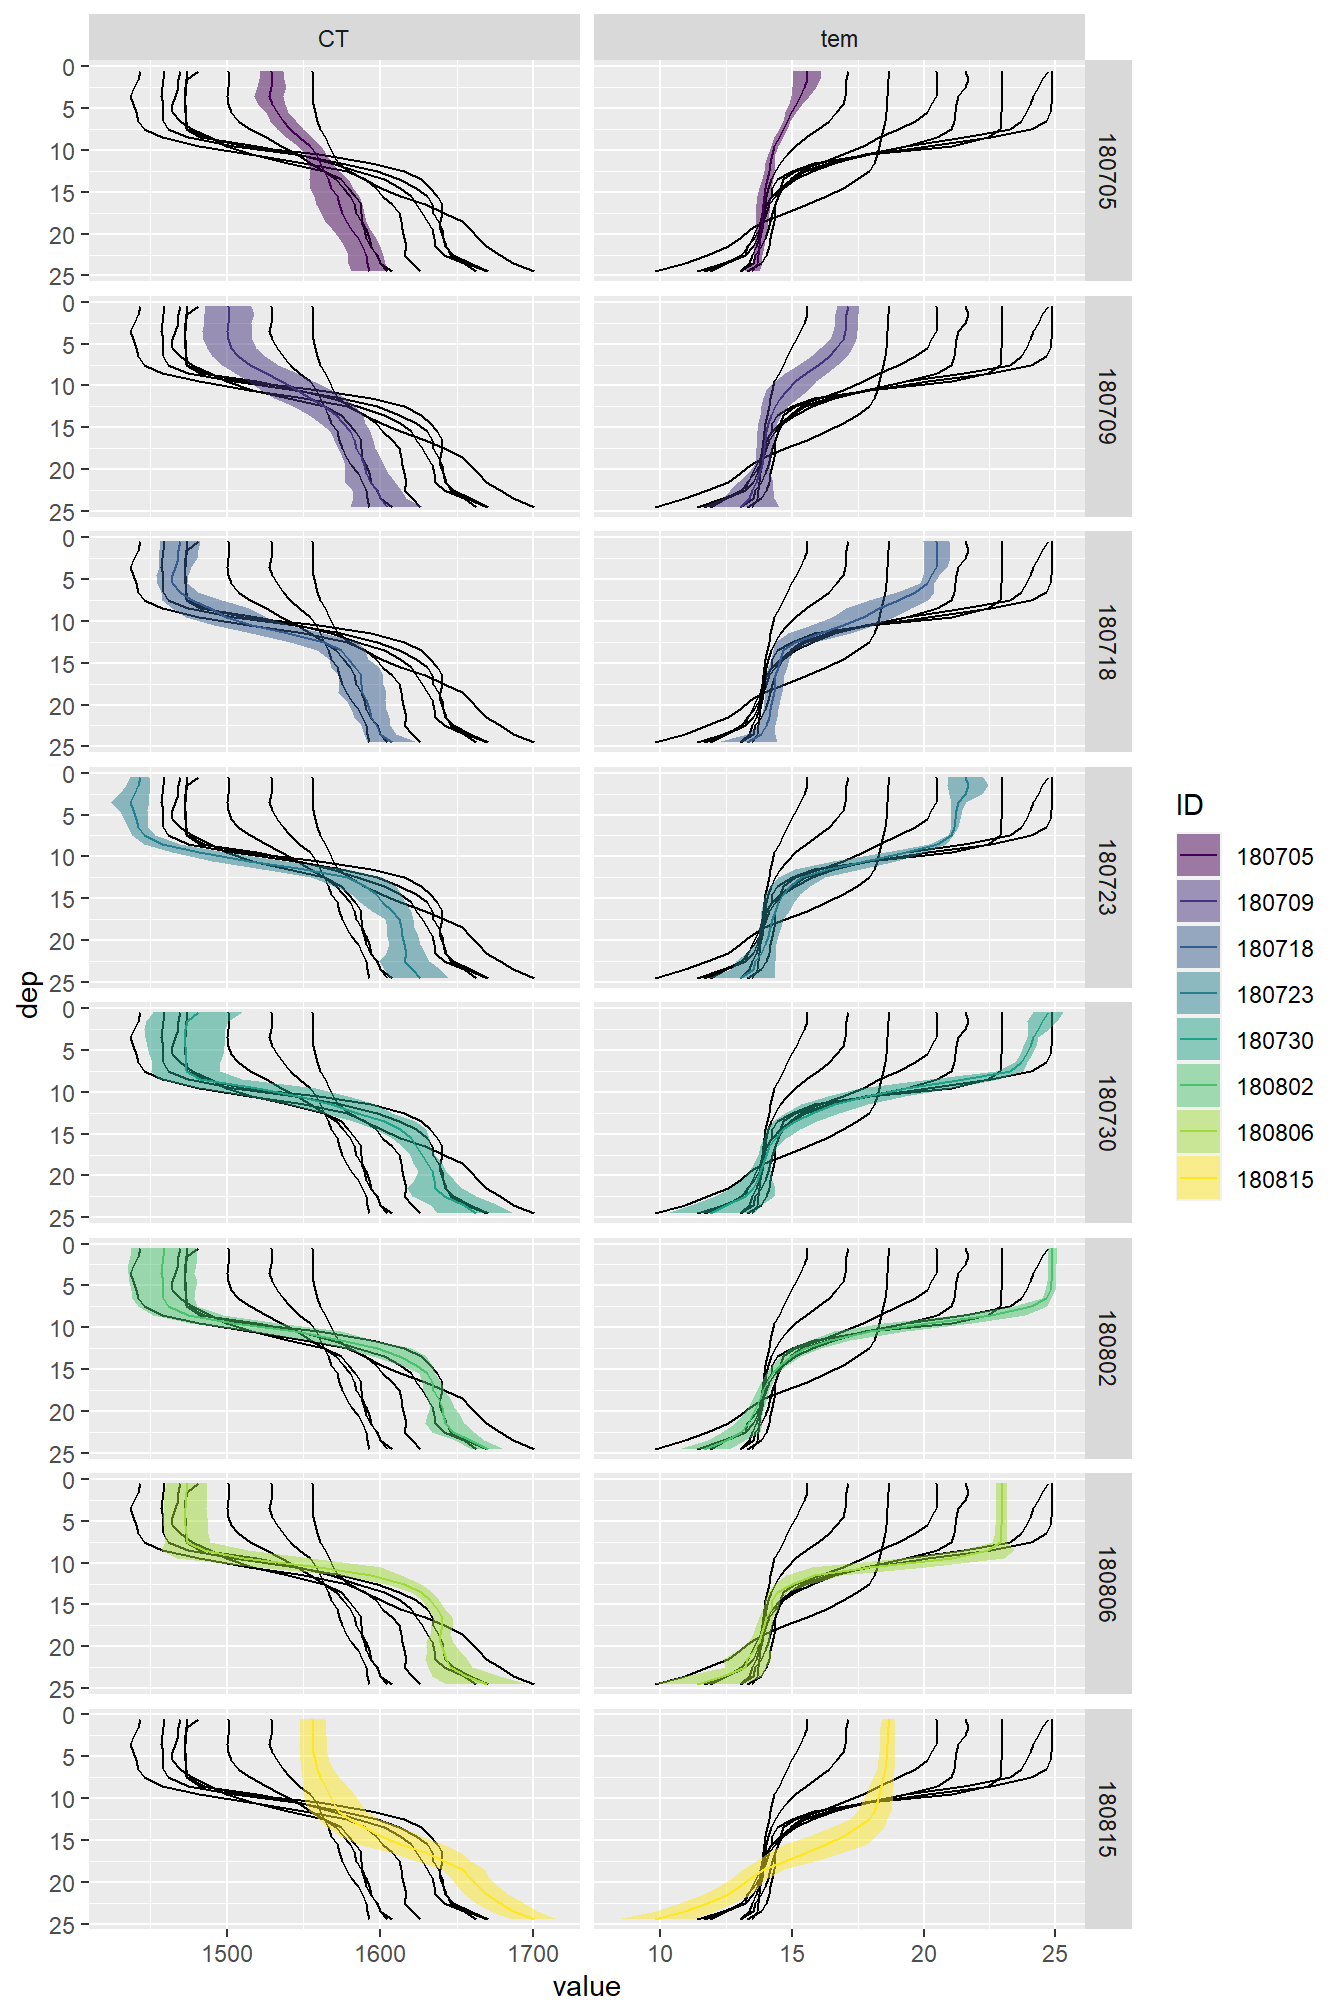 Mean vertical profiles per cruise day across all stations plotted indivdually